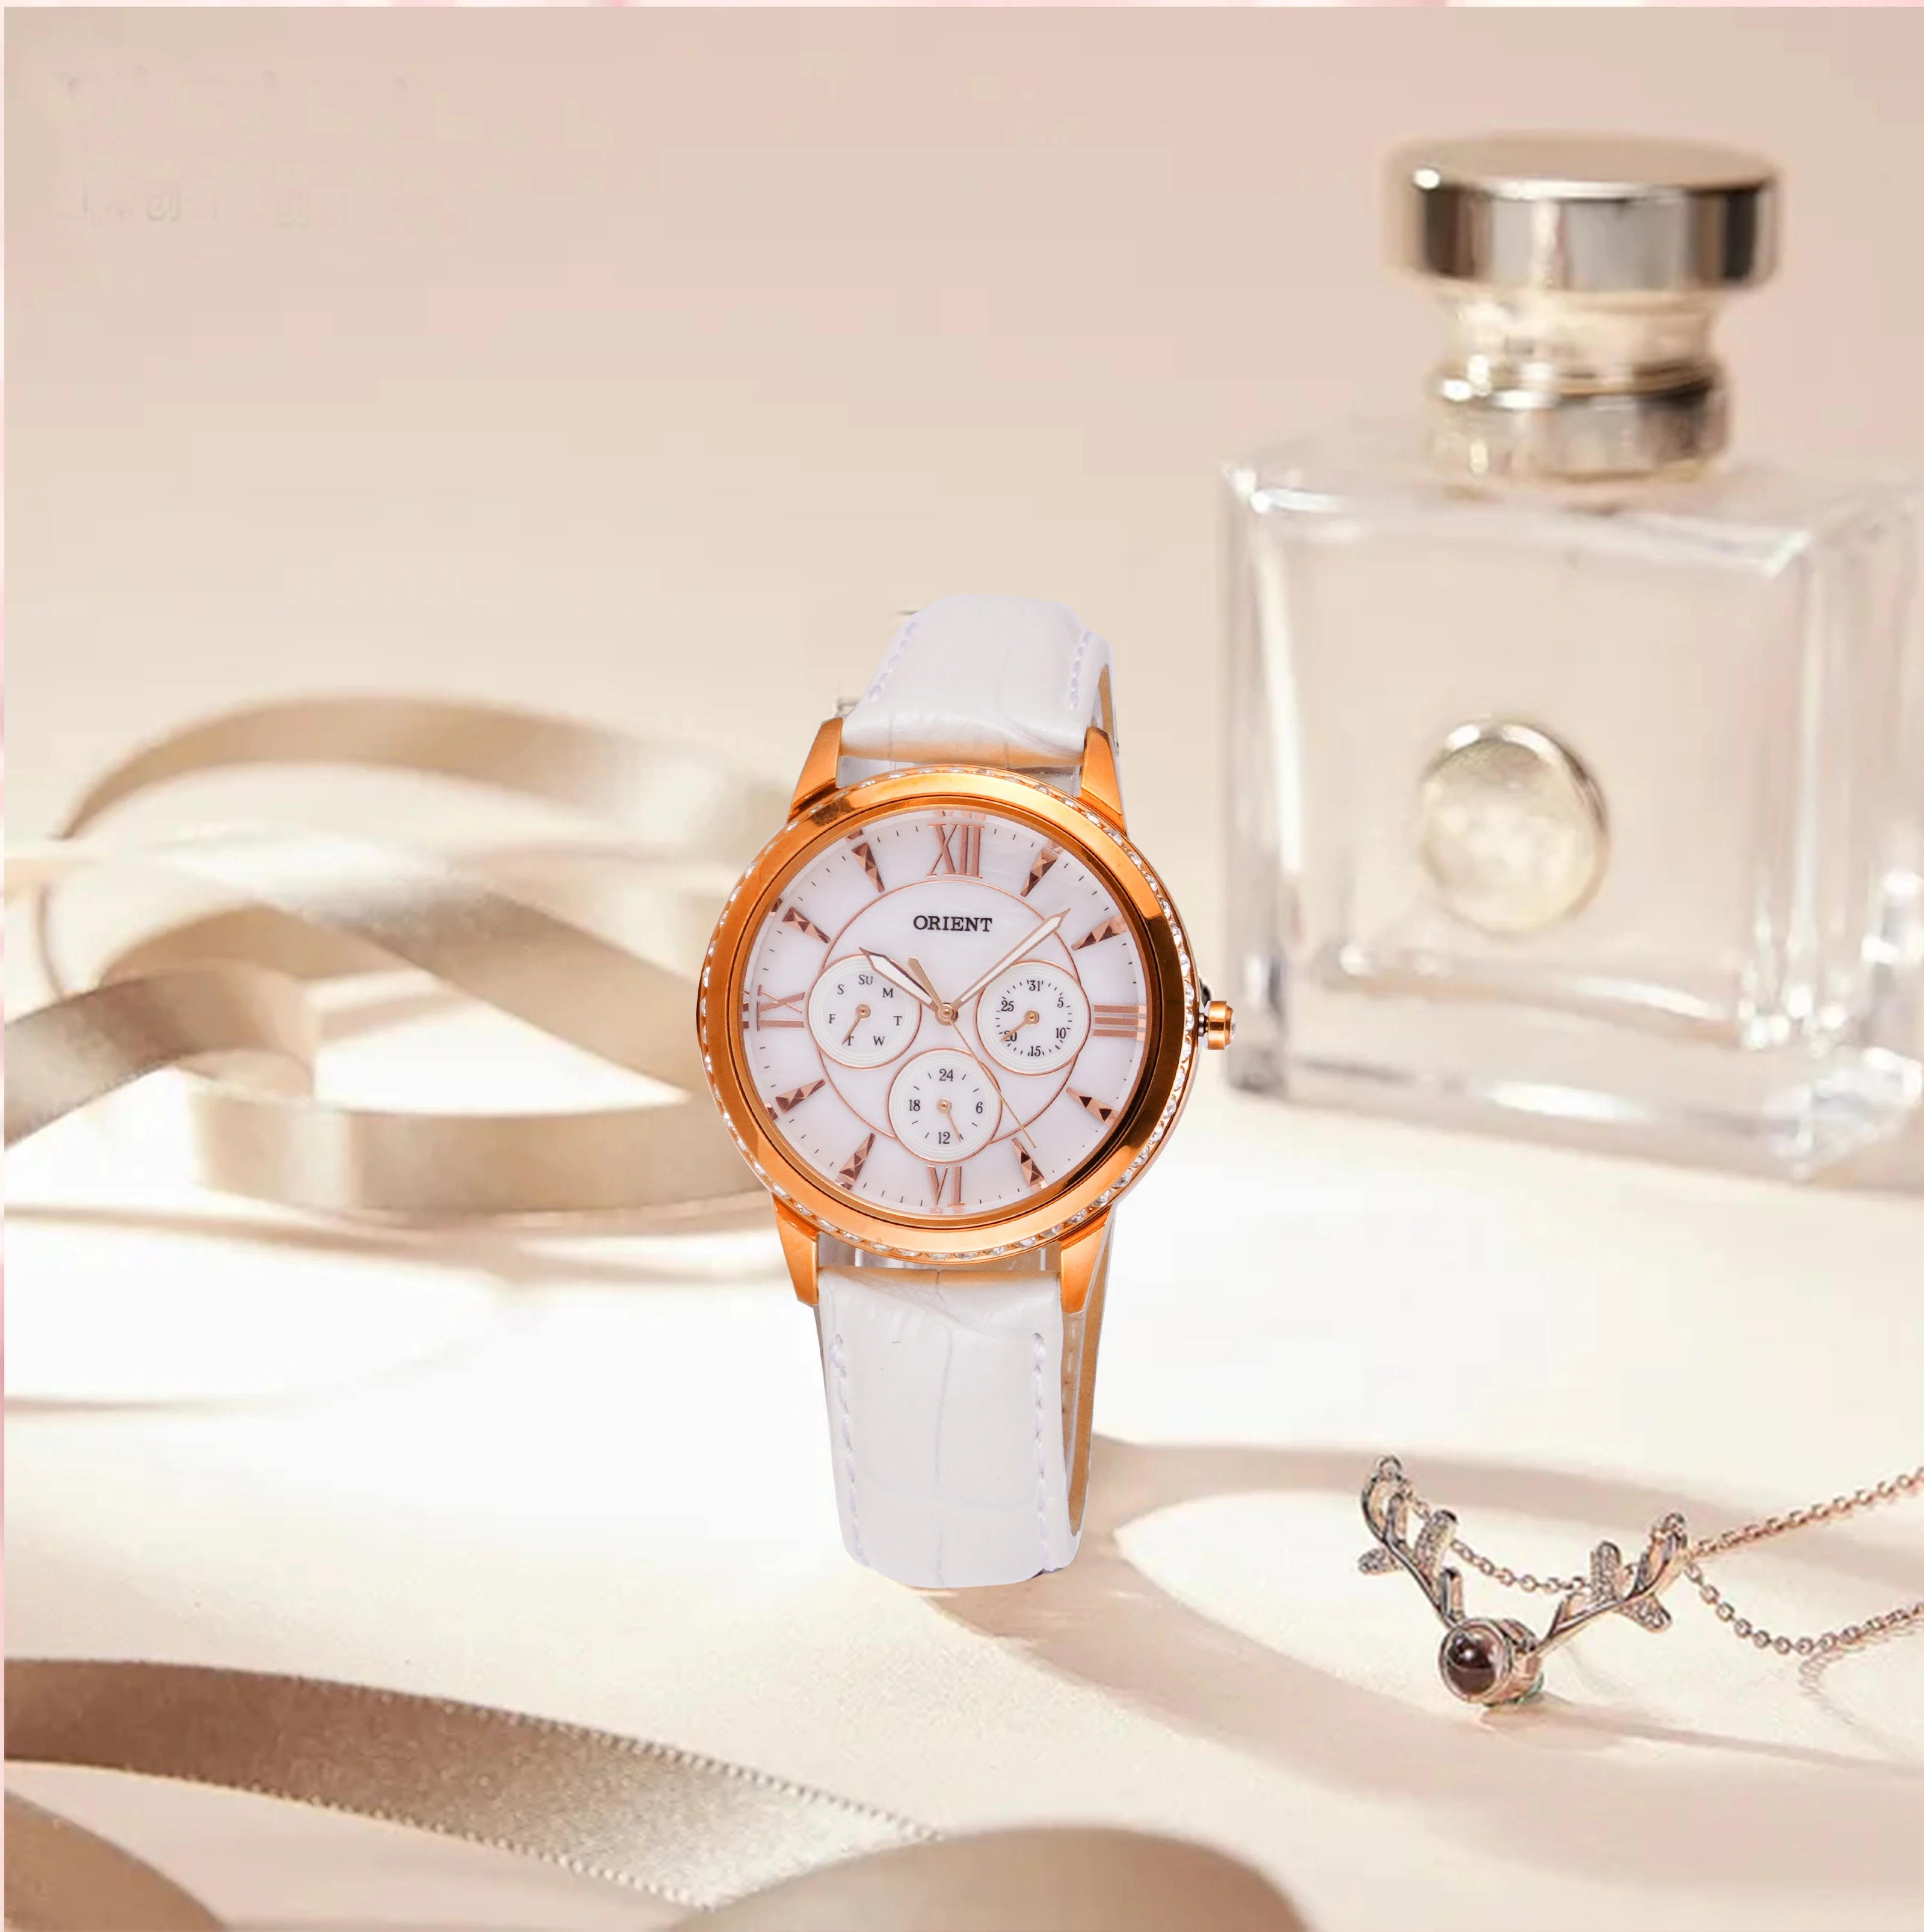 Original Orient Quartz Watch for Women, Japanese Ladies Watch Fashion Crystal-Encrusted Sapphire Glass Discontinued Model Sale enlarge